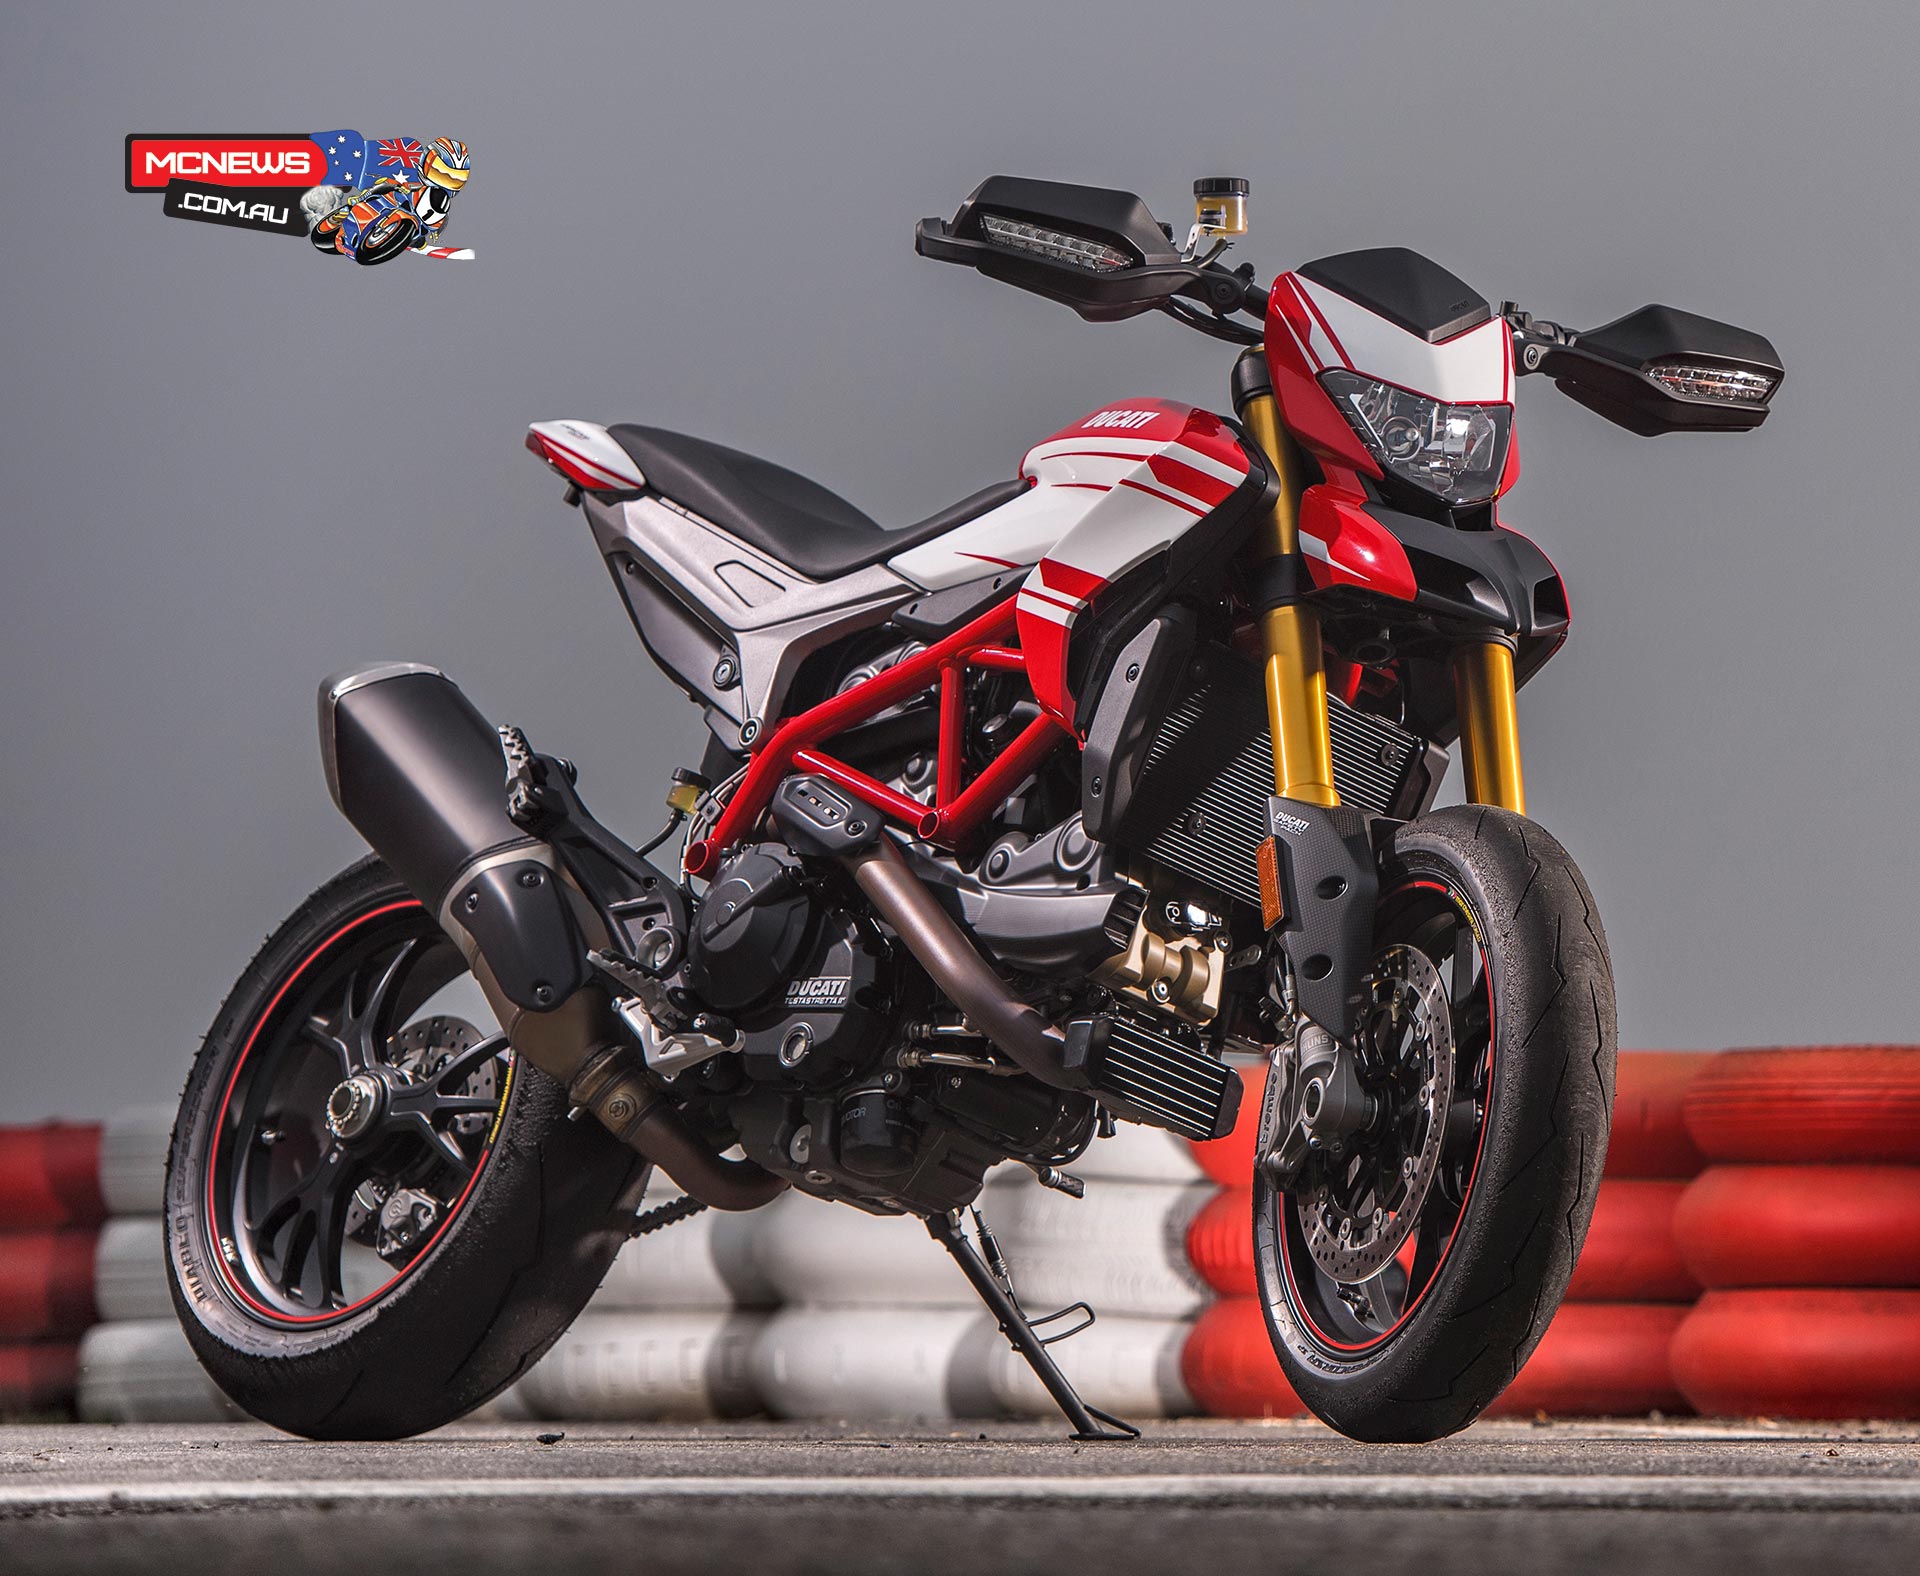 Ducati Hypermotard 939 Hyperstrada Motorcycle News Sport And Reviews